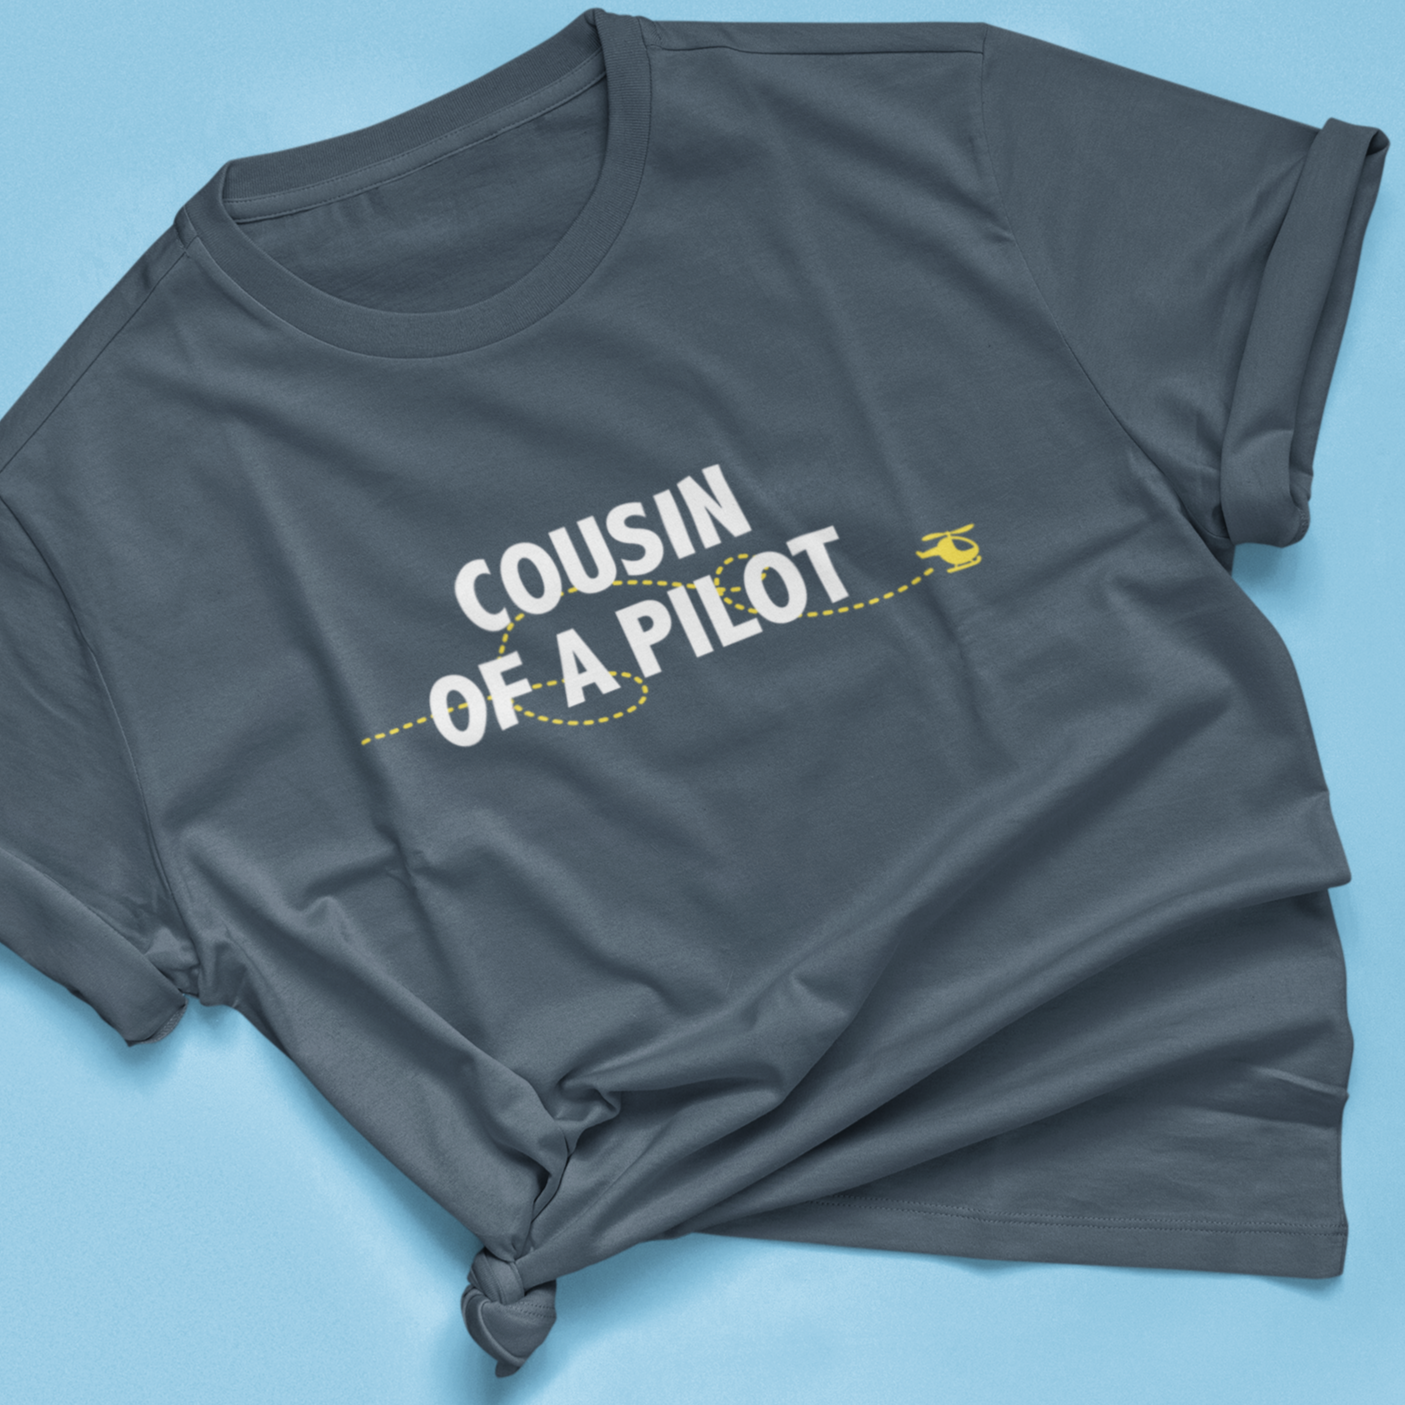 Cousin of the/a Pilot - Youth T-shirt